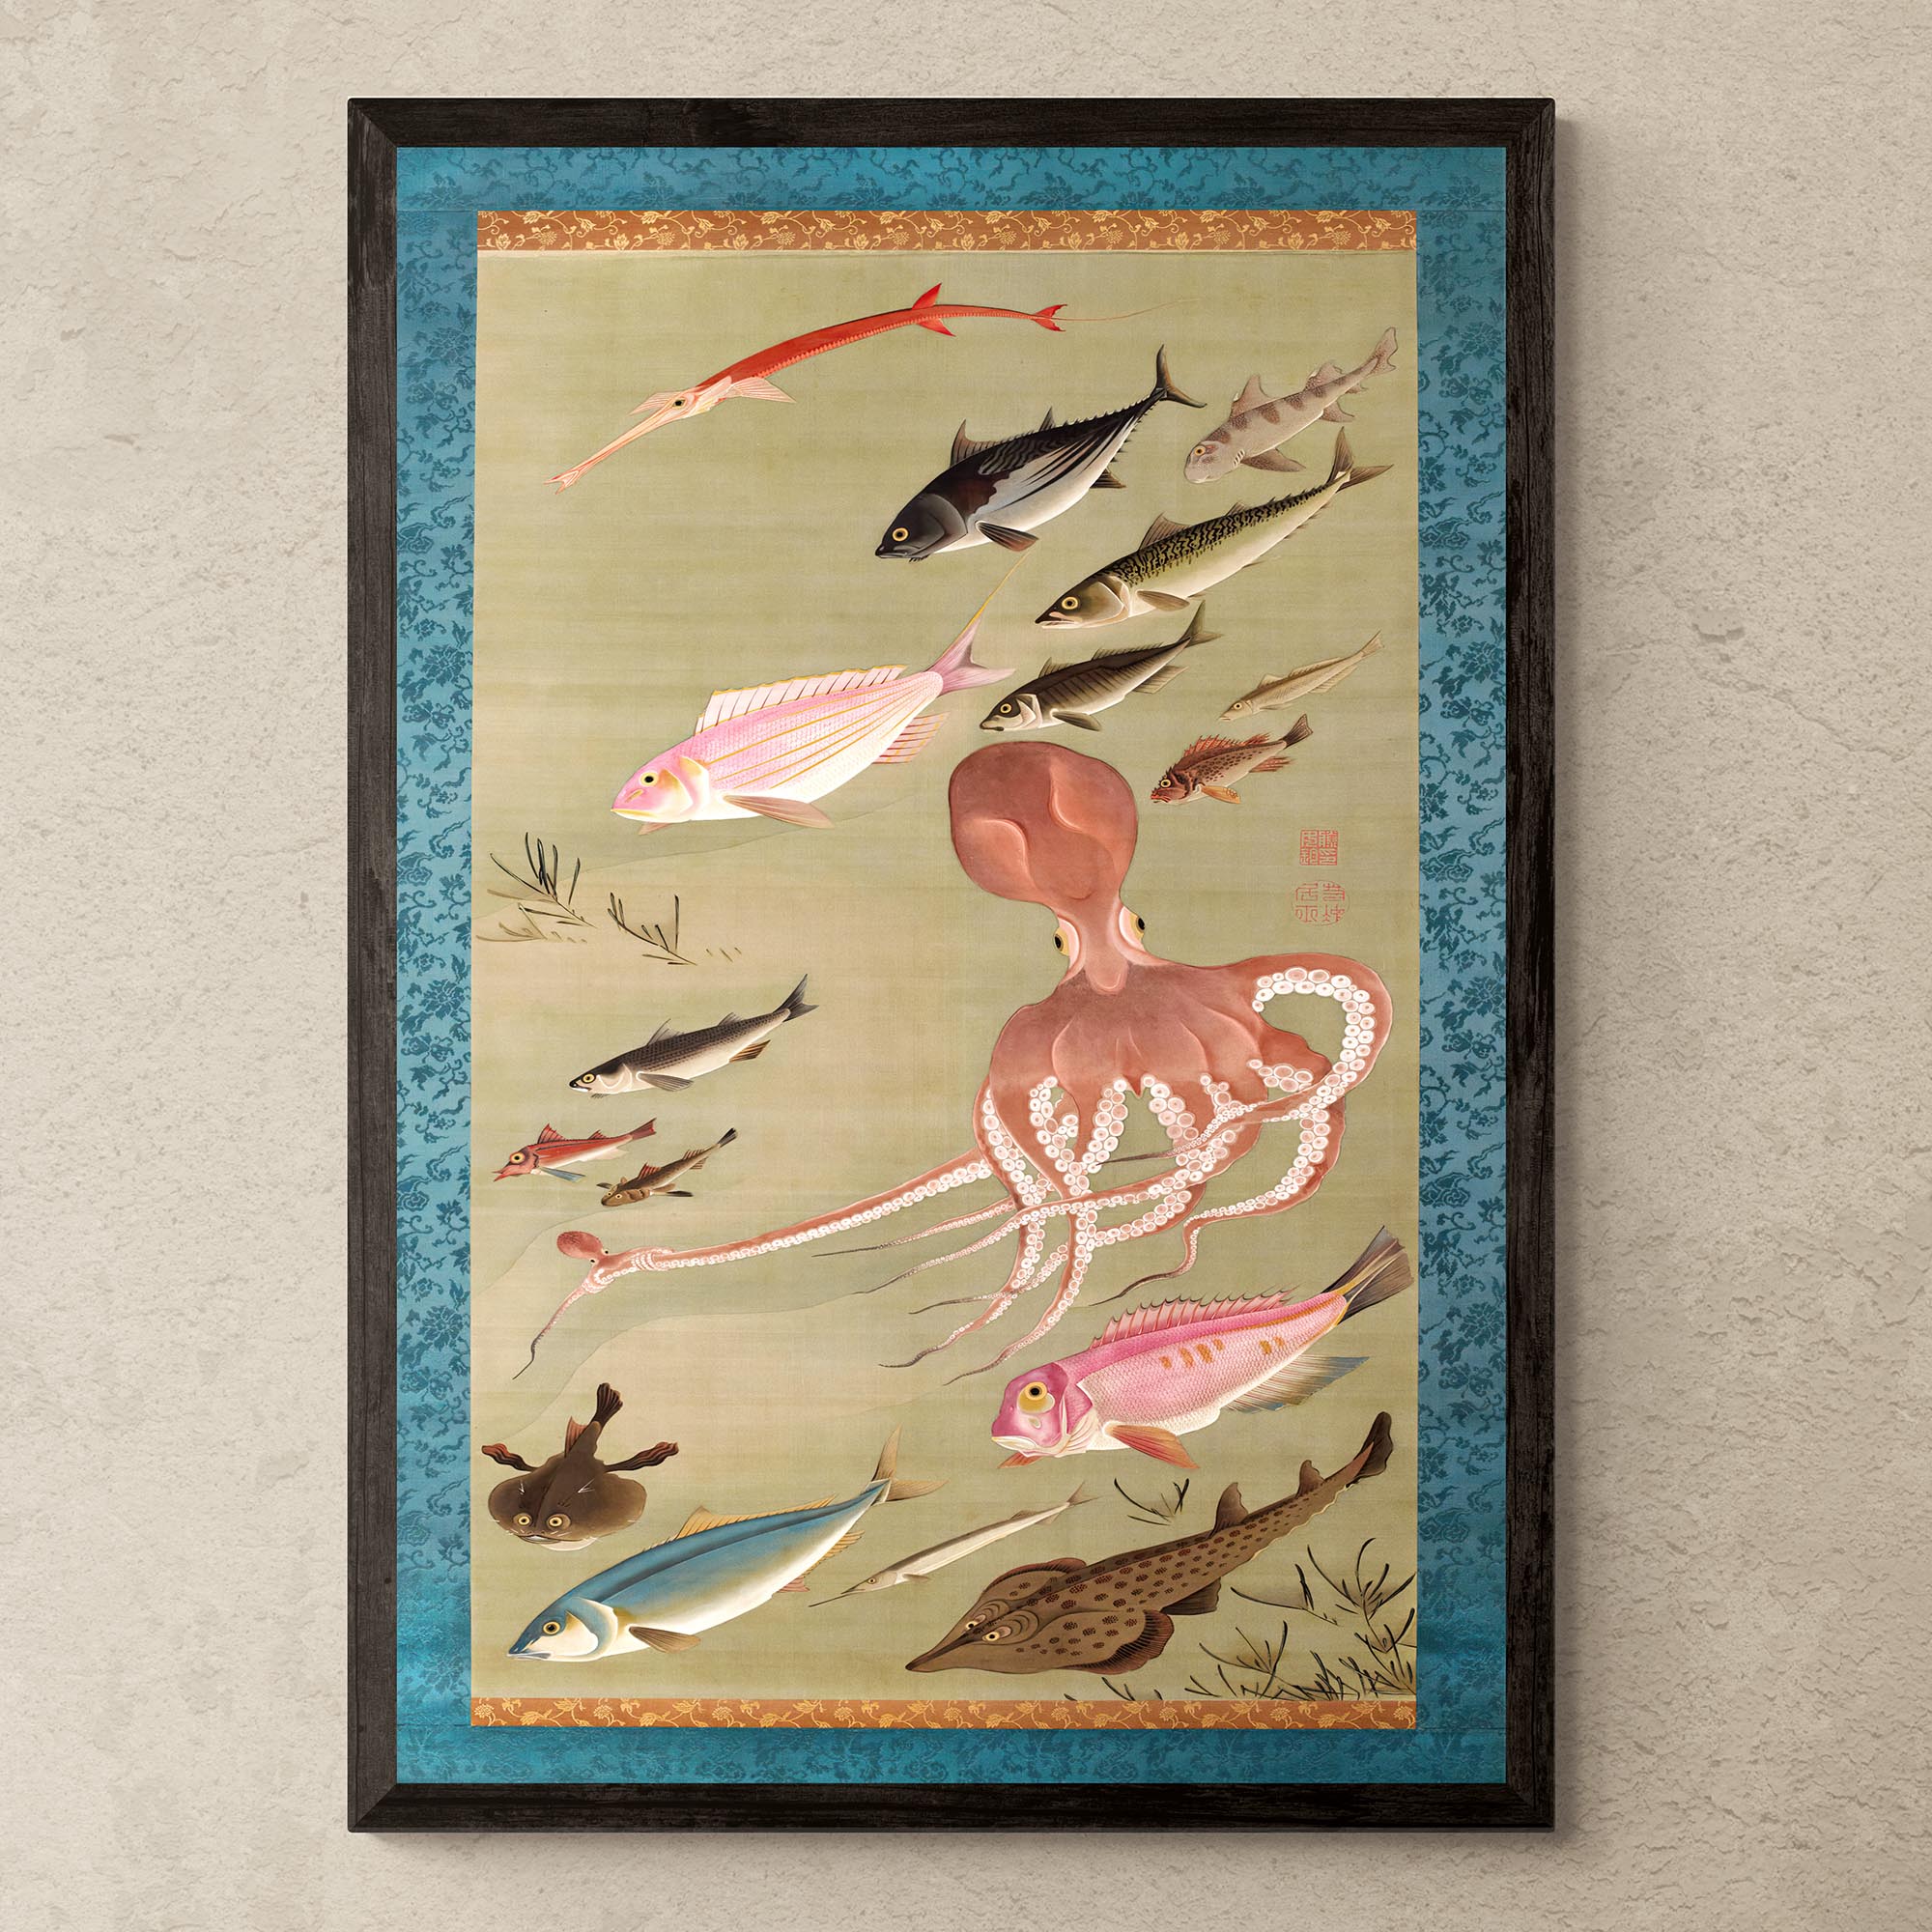 Fine art 4"x6" Colorful Realm of Living Beings | Fish and Octopus Vintage Japanese Painting of Aquatic Life Fine Art Pint